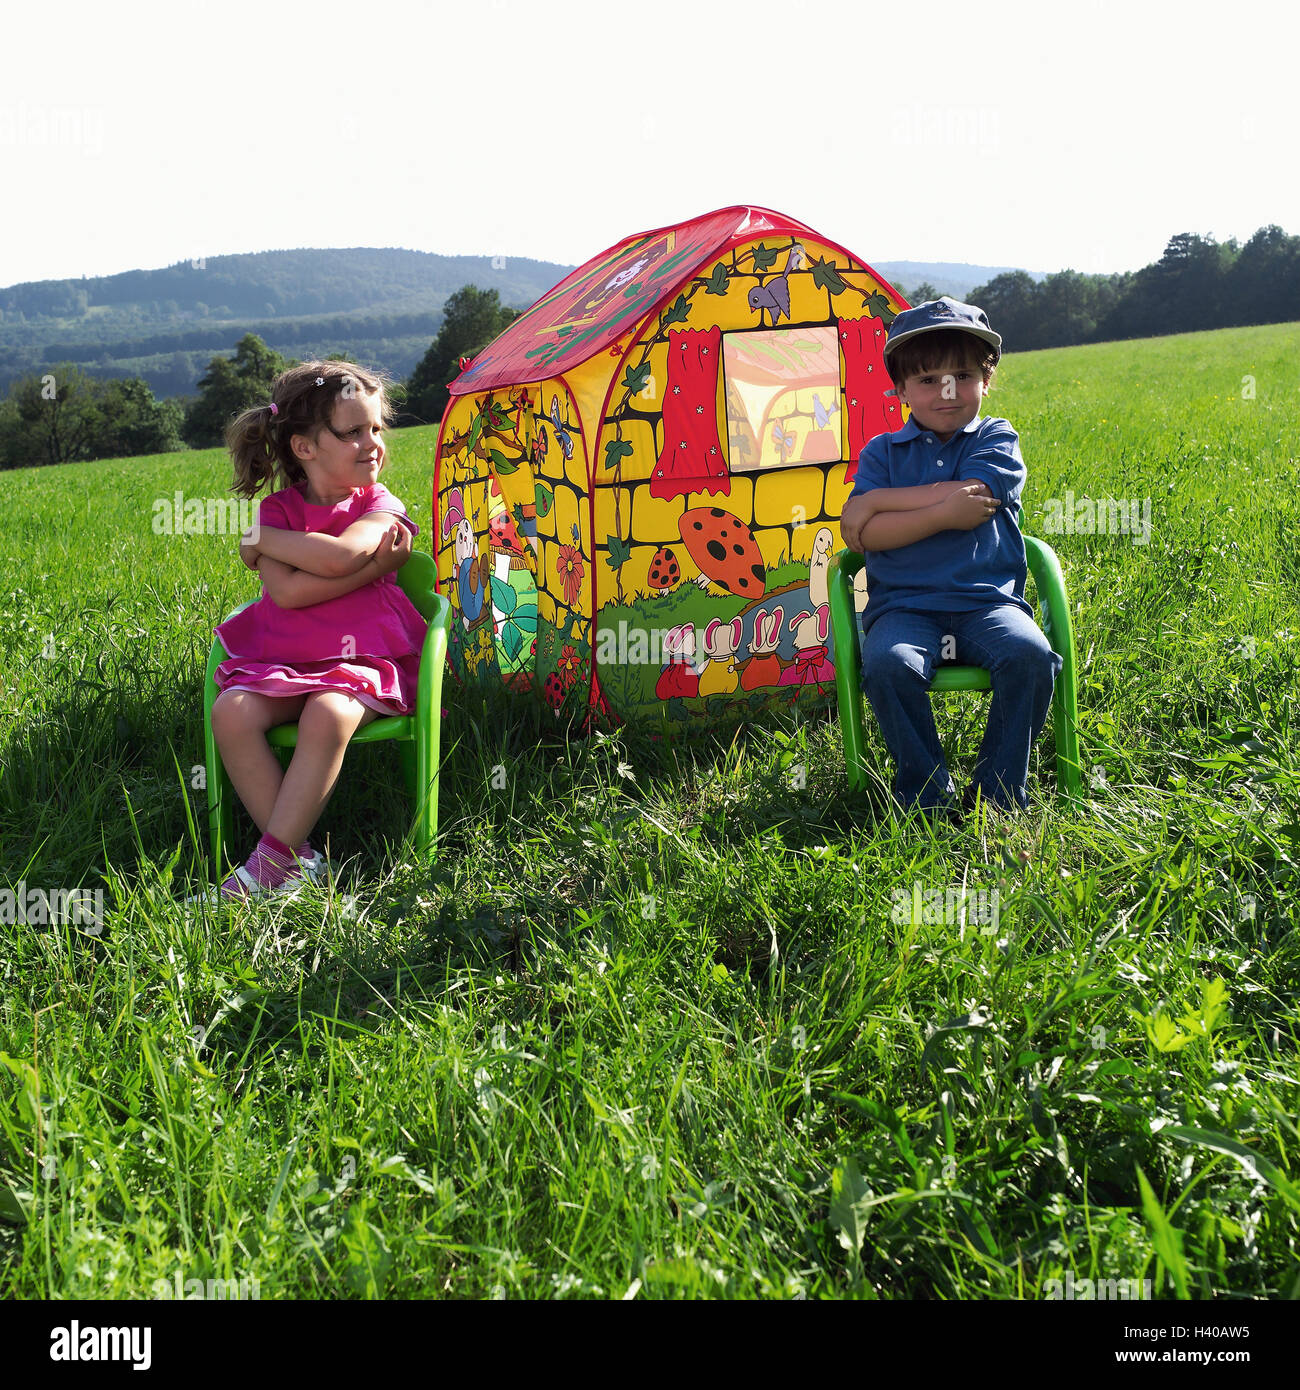 Meadow, children-game house, children, sit, chairs, arms, crosses, 4 years, siblings, boy, girl, friends, sulk, play fight, difference, distance, distance, childhood, tent, house, brightly, colourfully, icon, own home, security, security, Eigenheim-Kredit Stock Photo